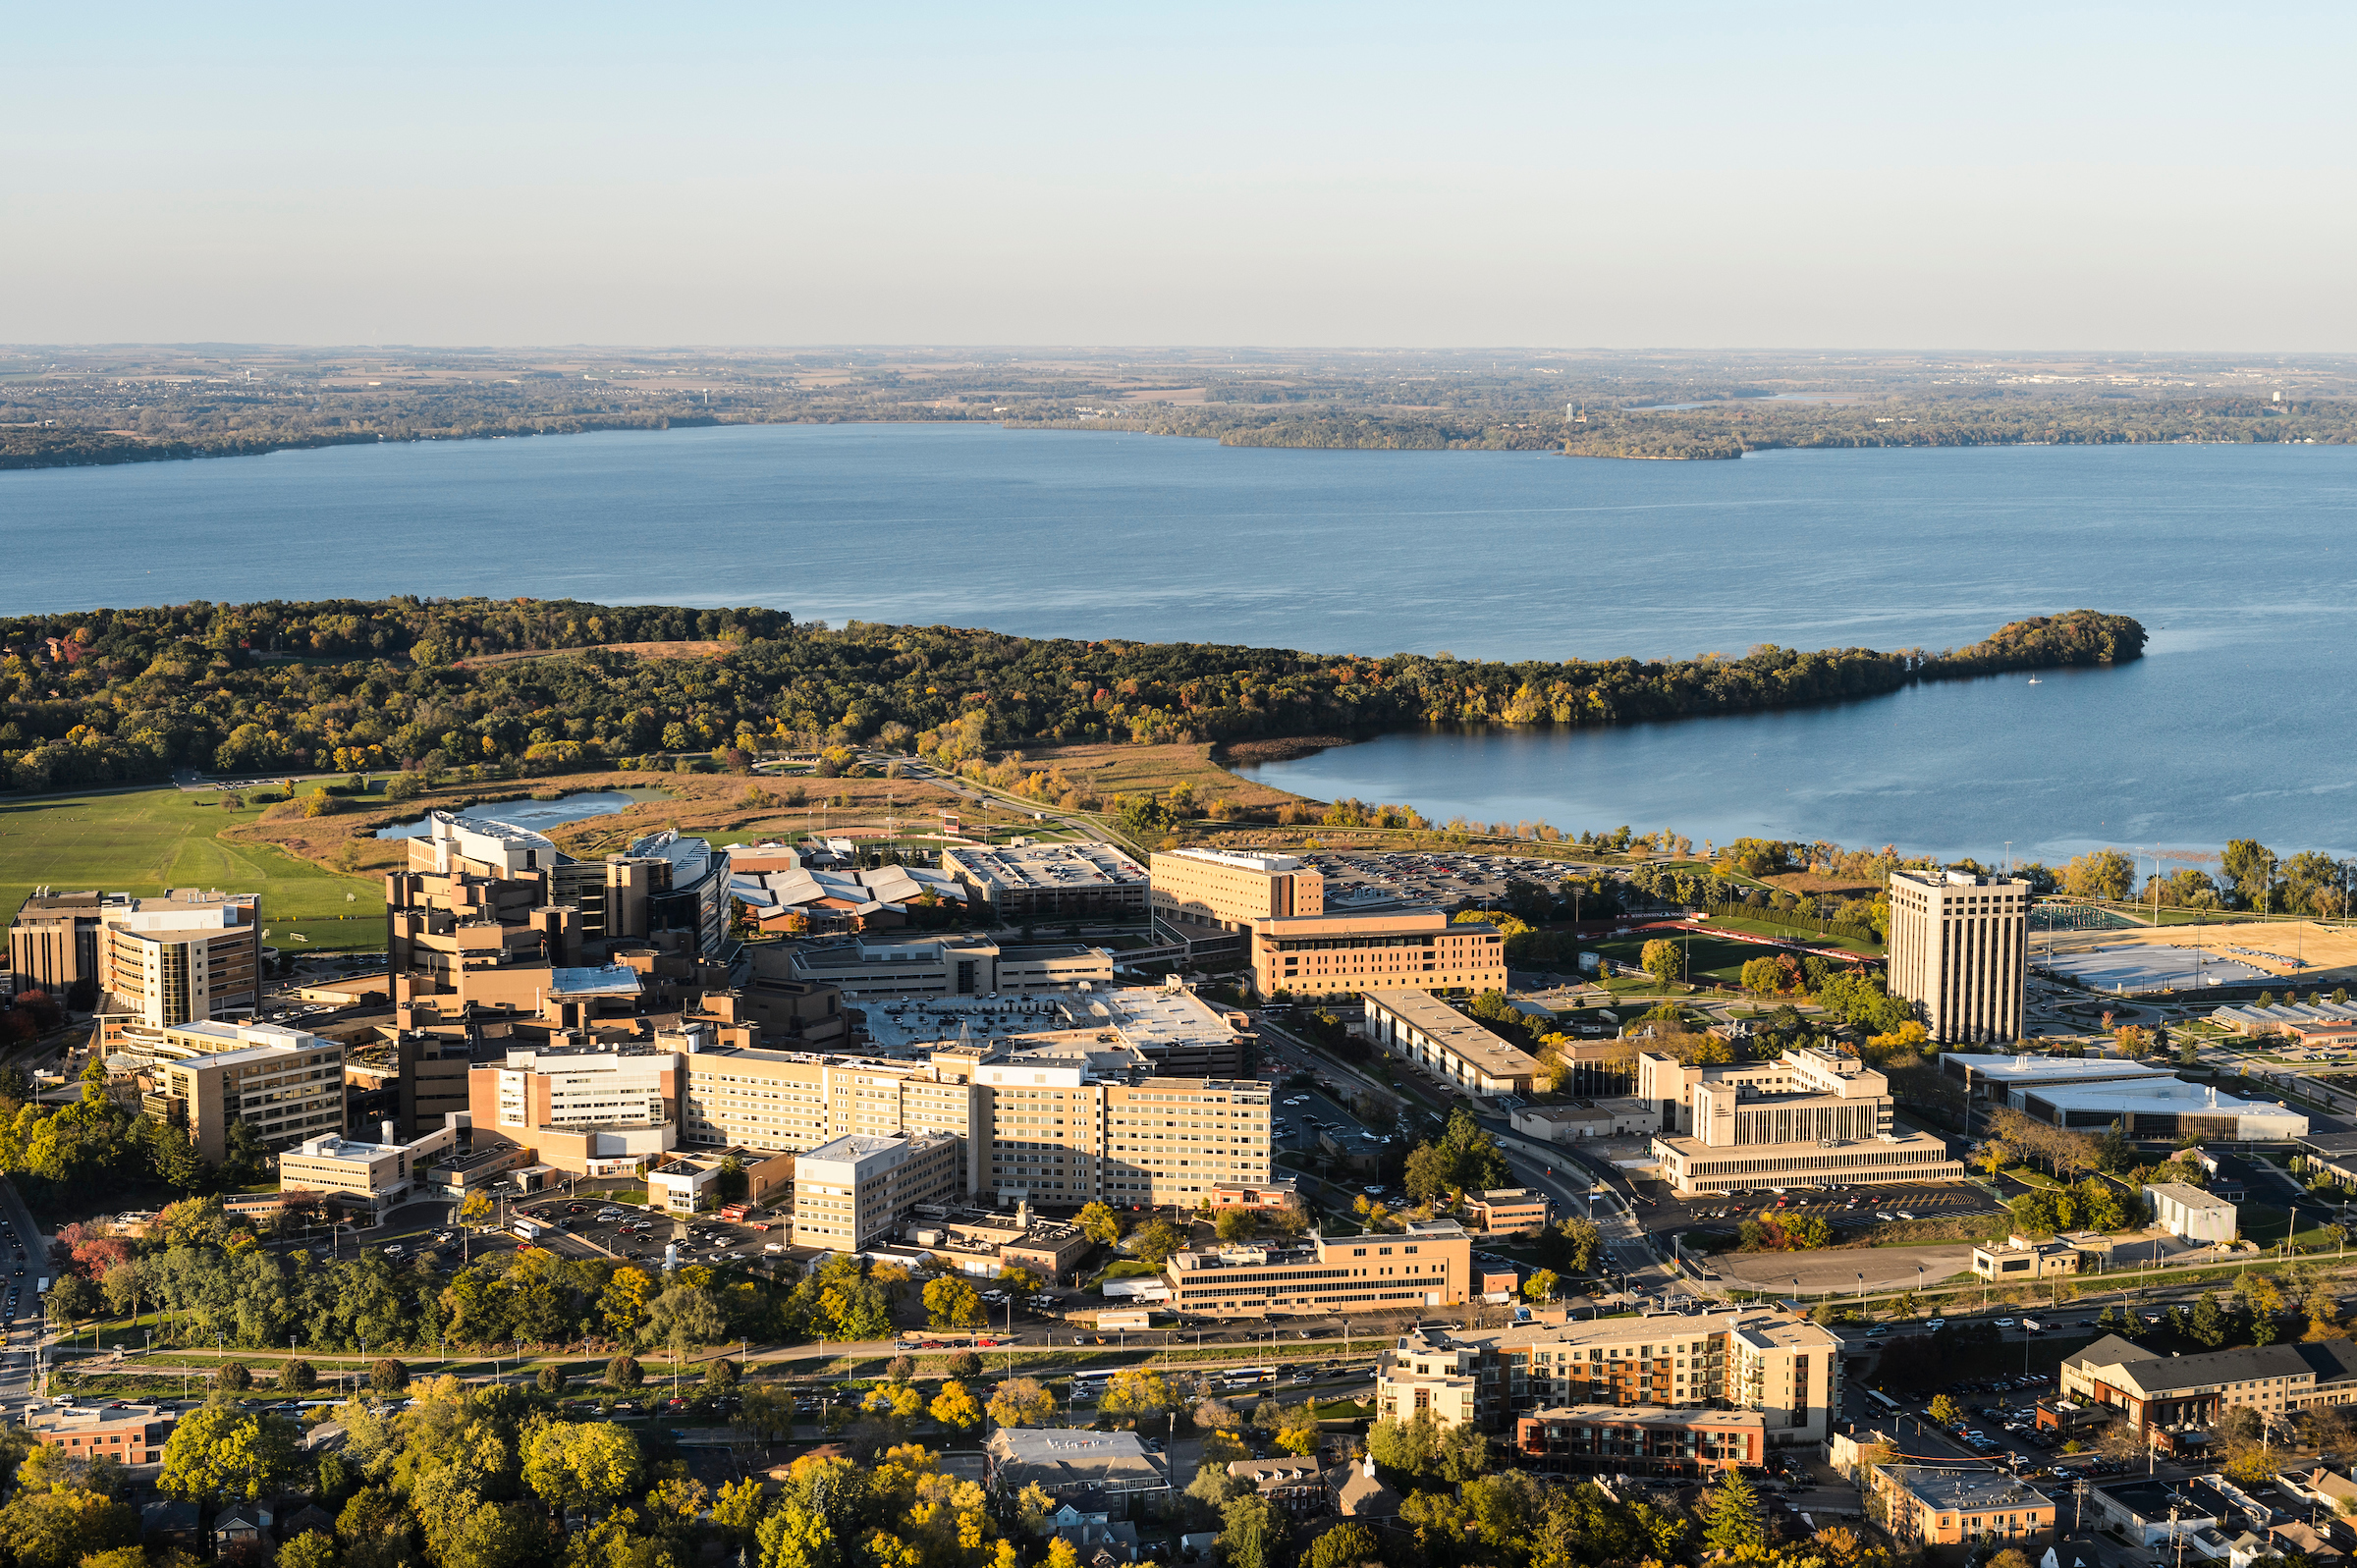 The far western portion of the University of Wisconsin–Madison campus, which includes the medical complex featuring UW Hospitals and Clinics, Picnic Point and Lake Mendota, are pictured in an aerial view during autumn on Oct. 13, 2016. The photograph was made from a helicopter looking west. 